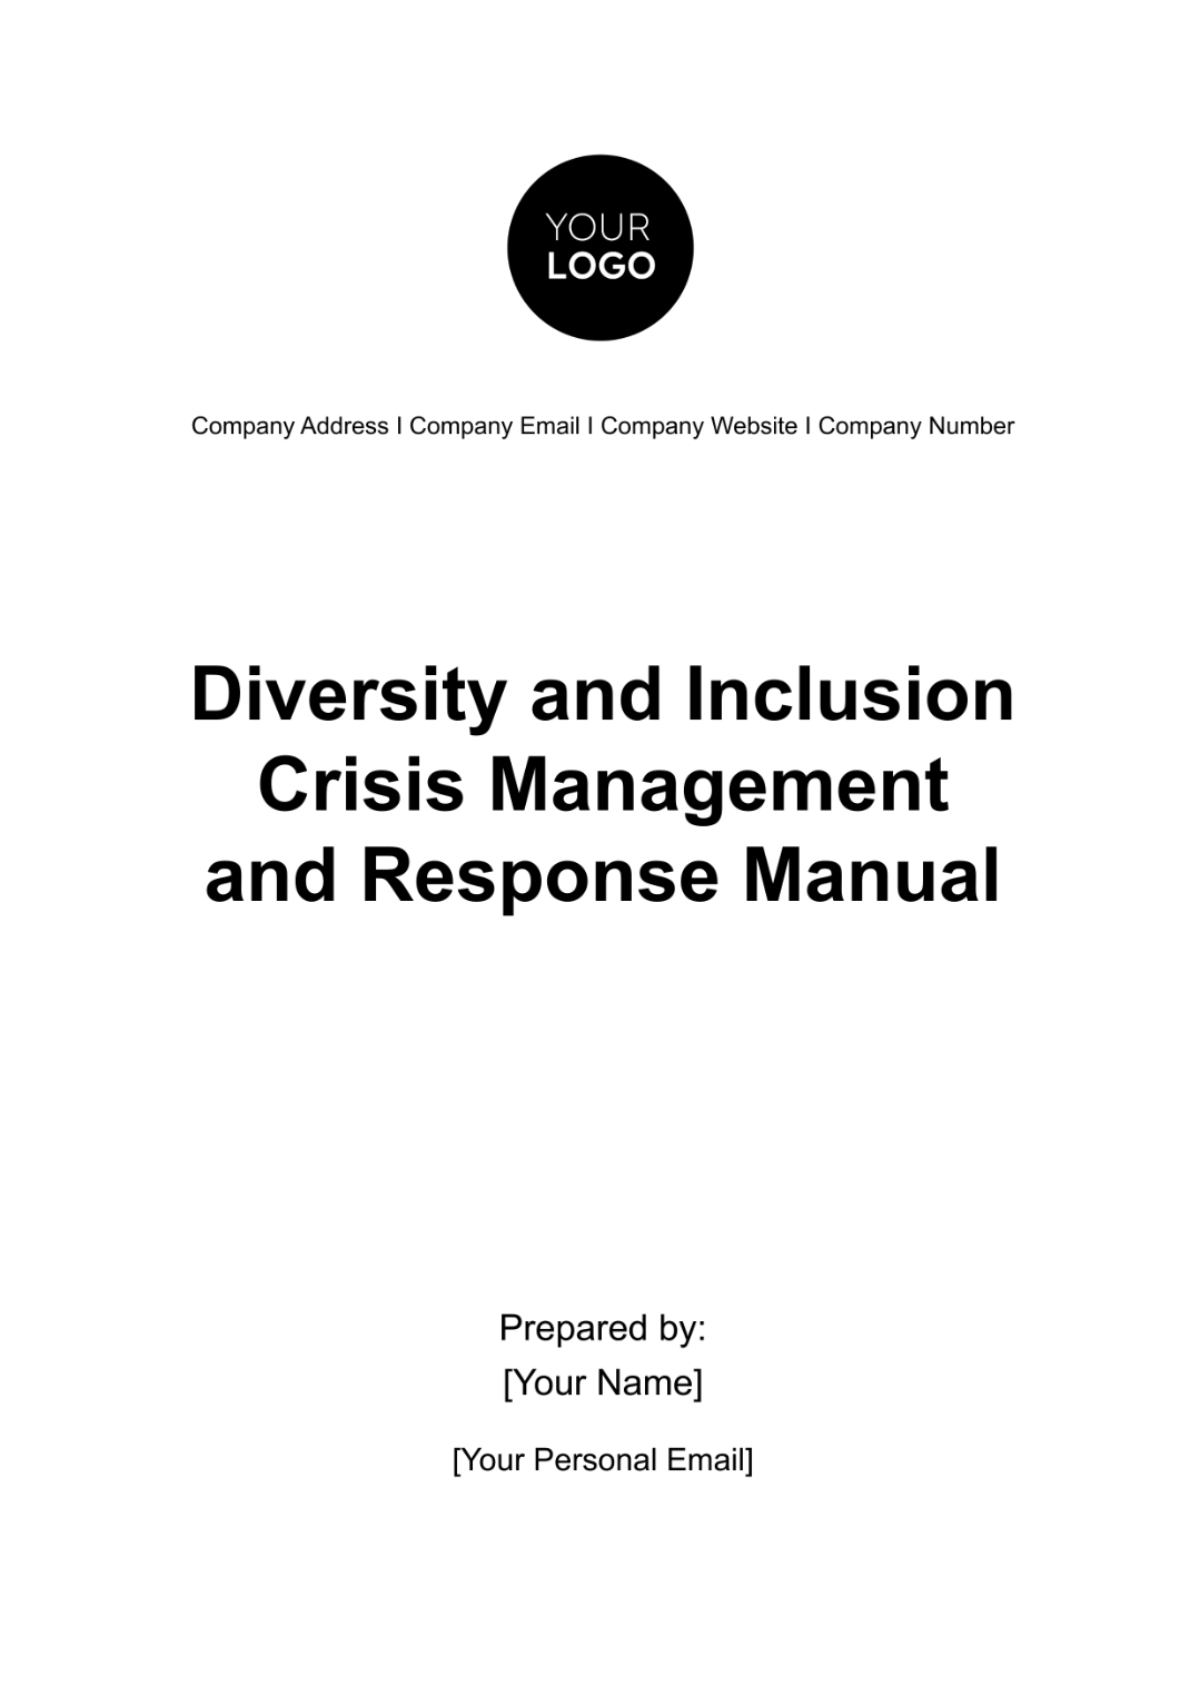 Free Diversity and Inclusion Crisis Management and Response Manual HR Template